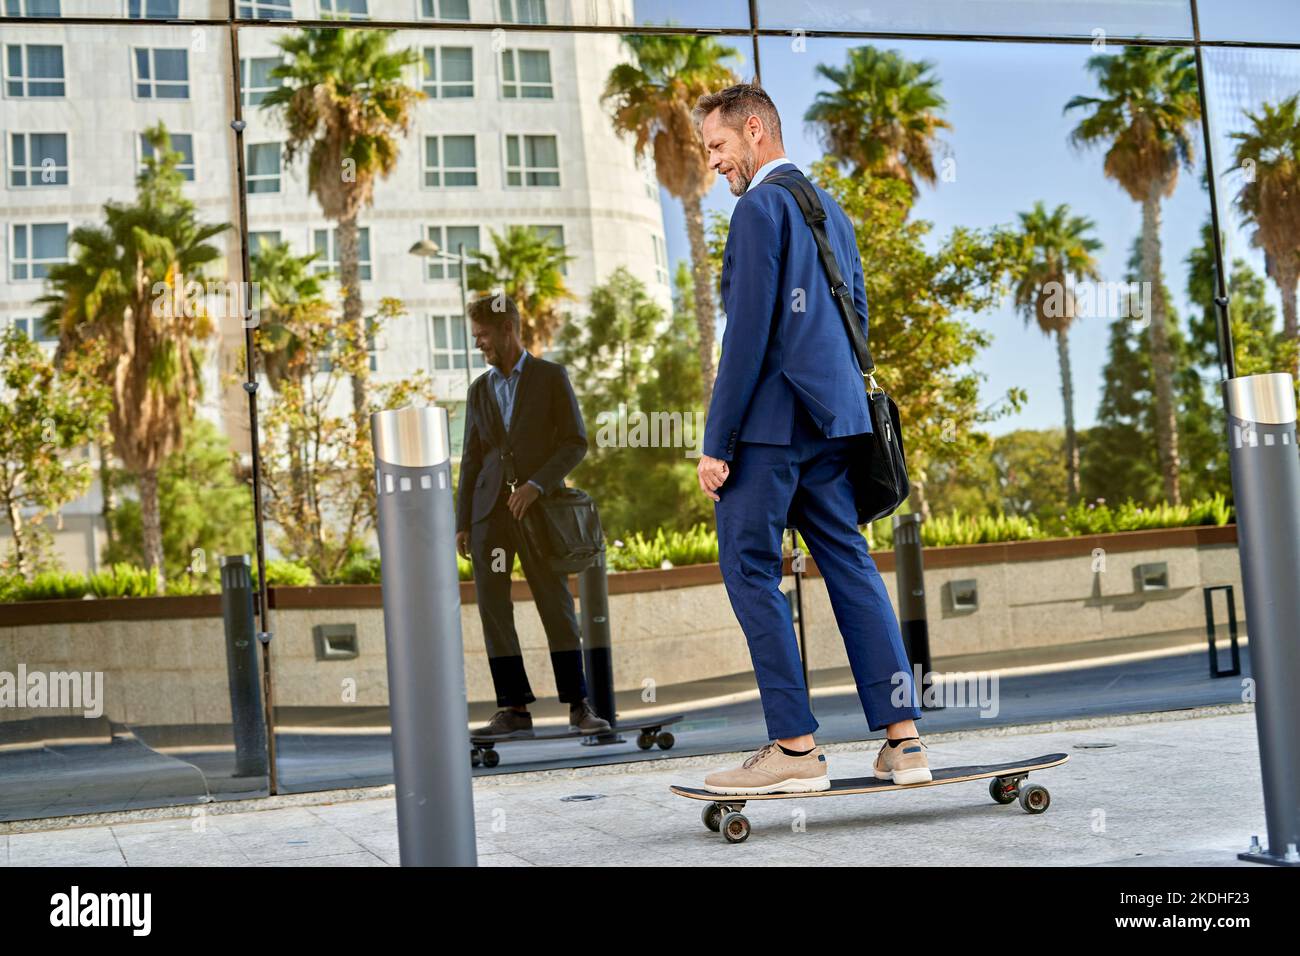 businessman On The Street With A Skateboard. Stock Photo